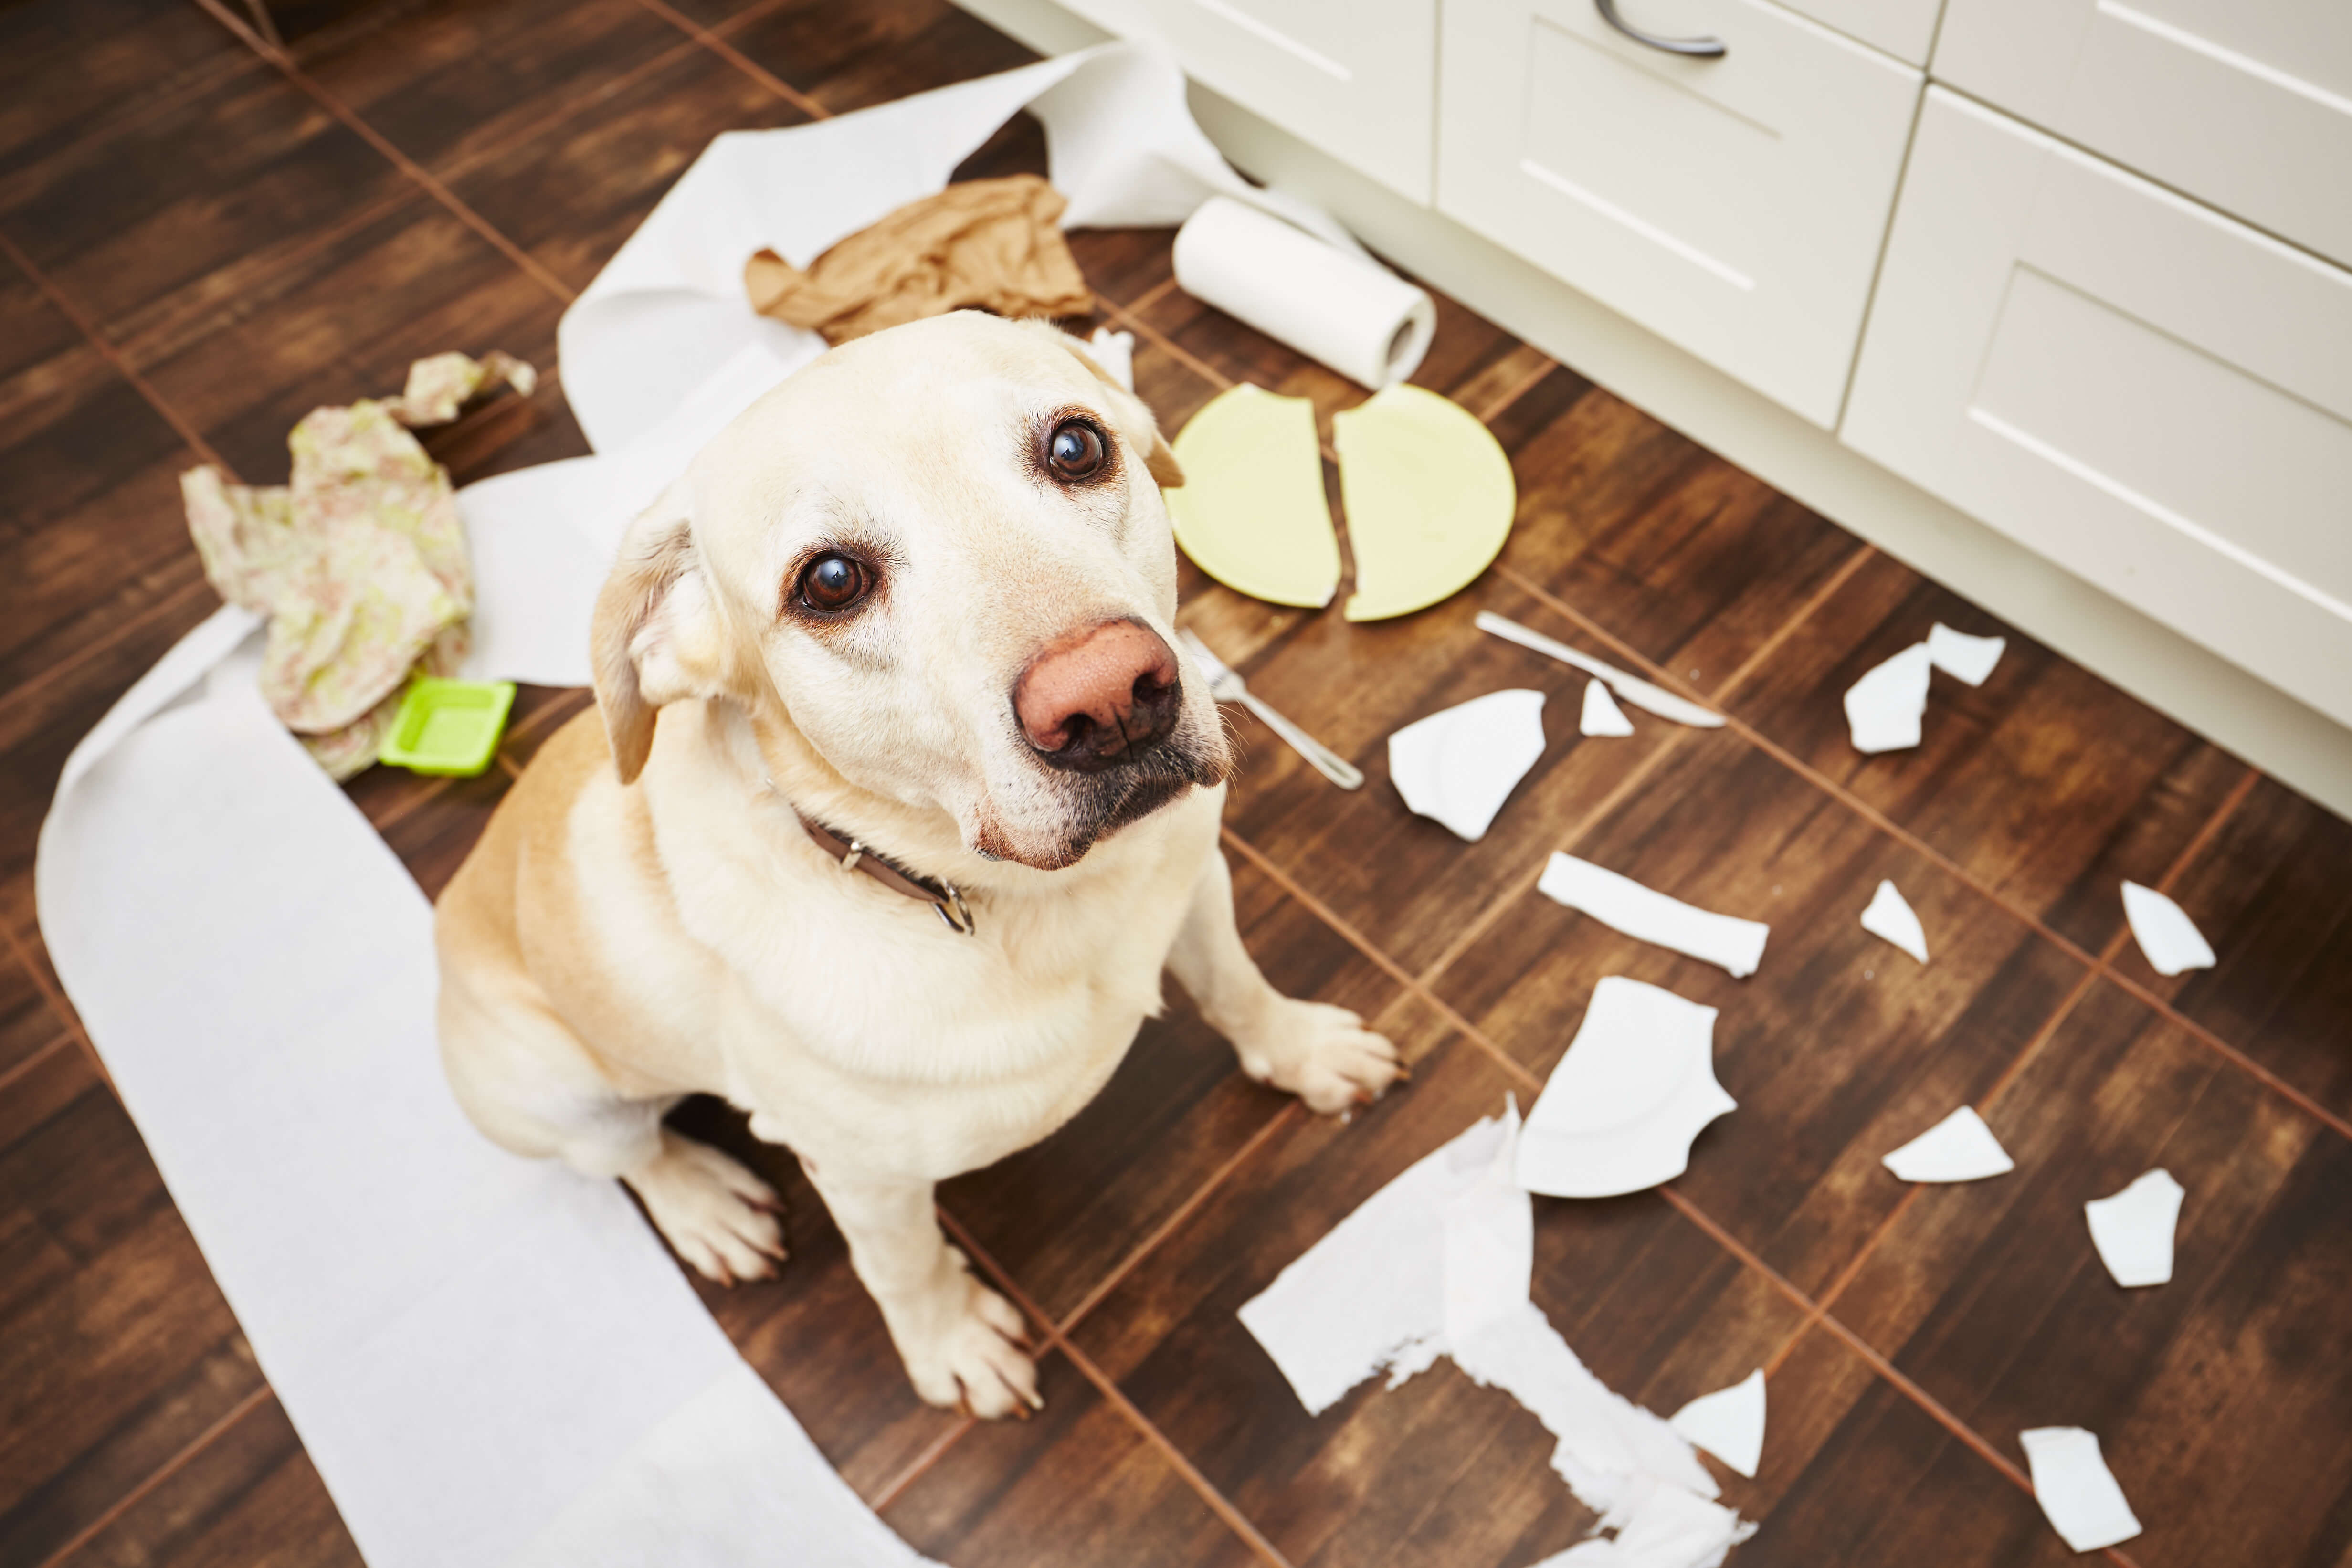 Dogs can present us with all types of unwanted behaviors.